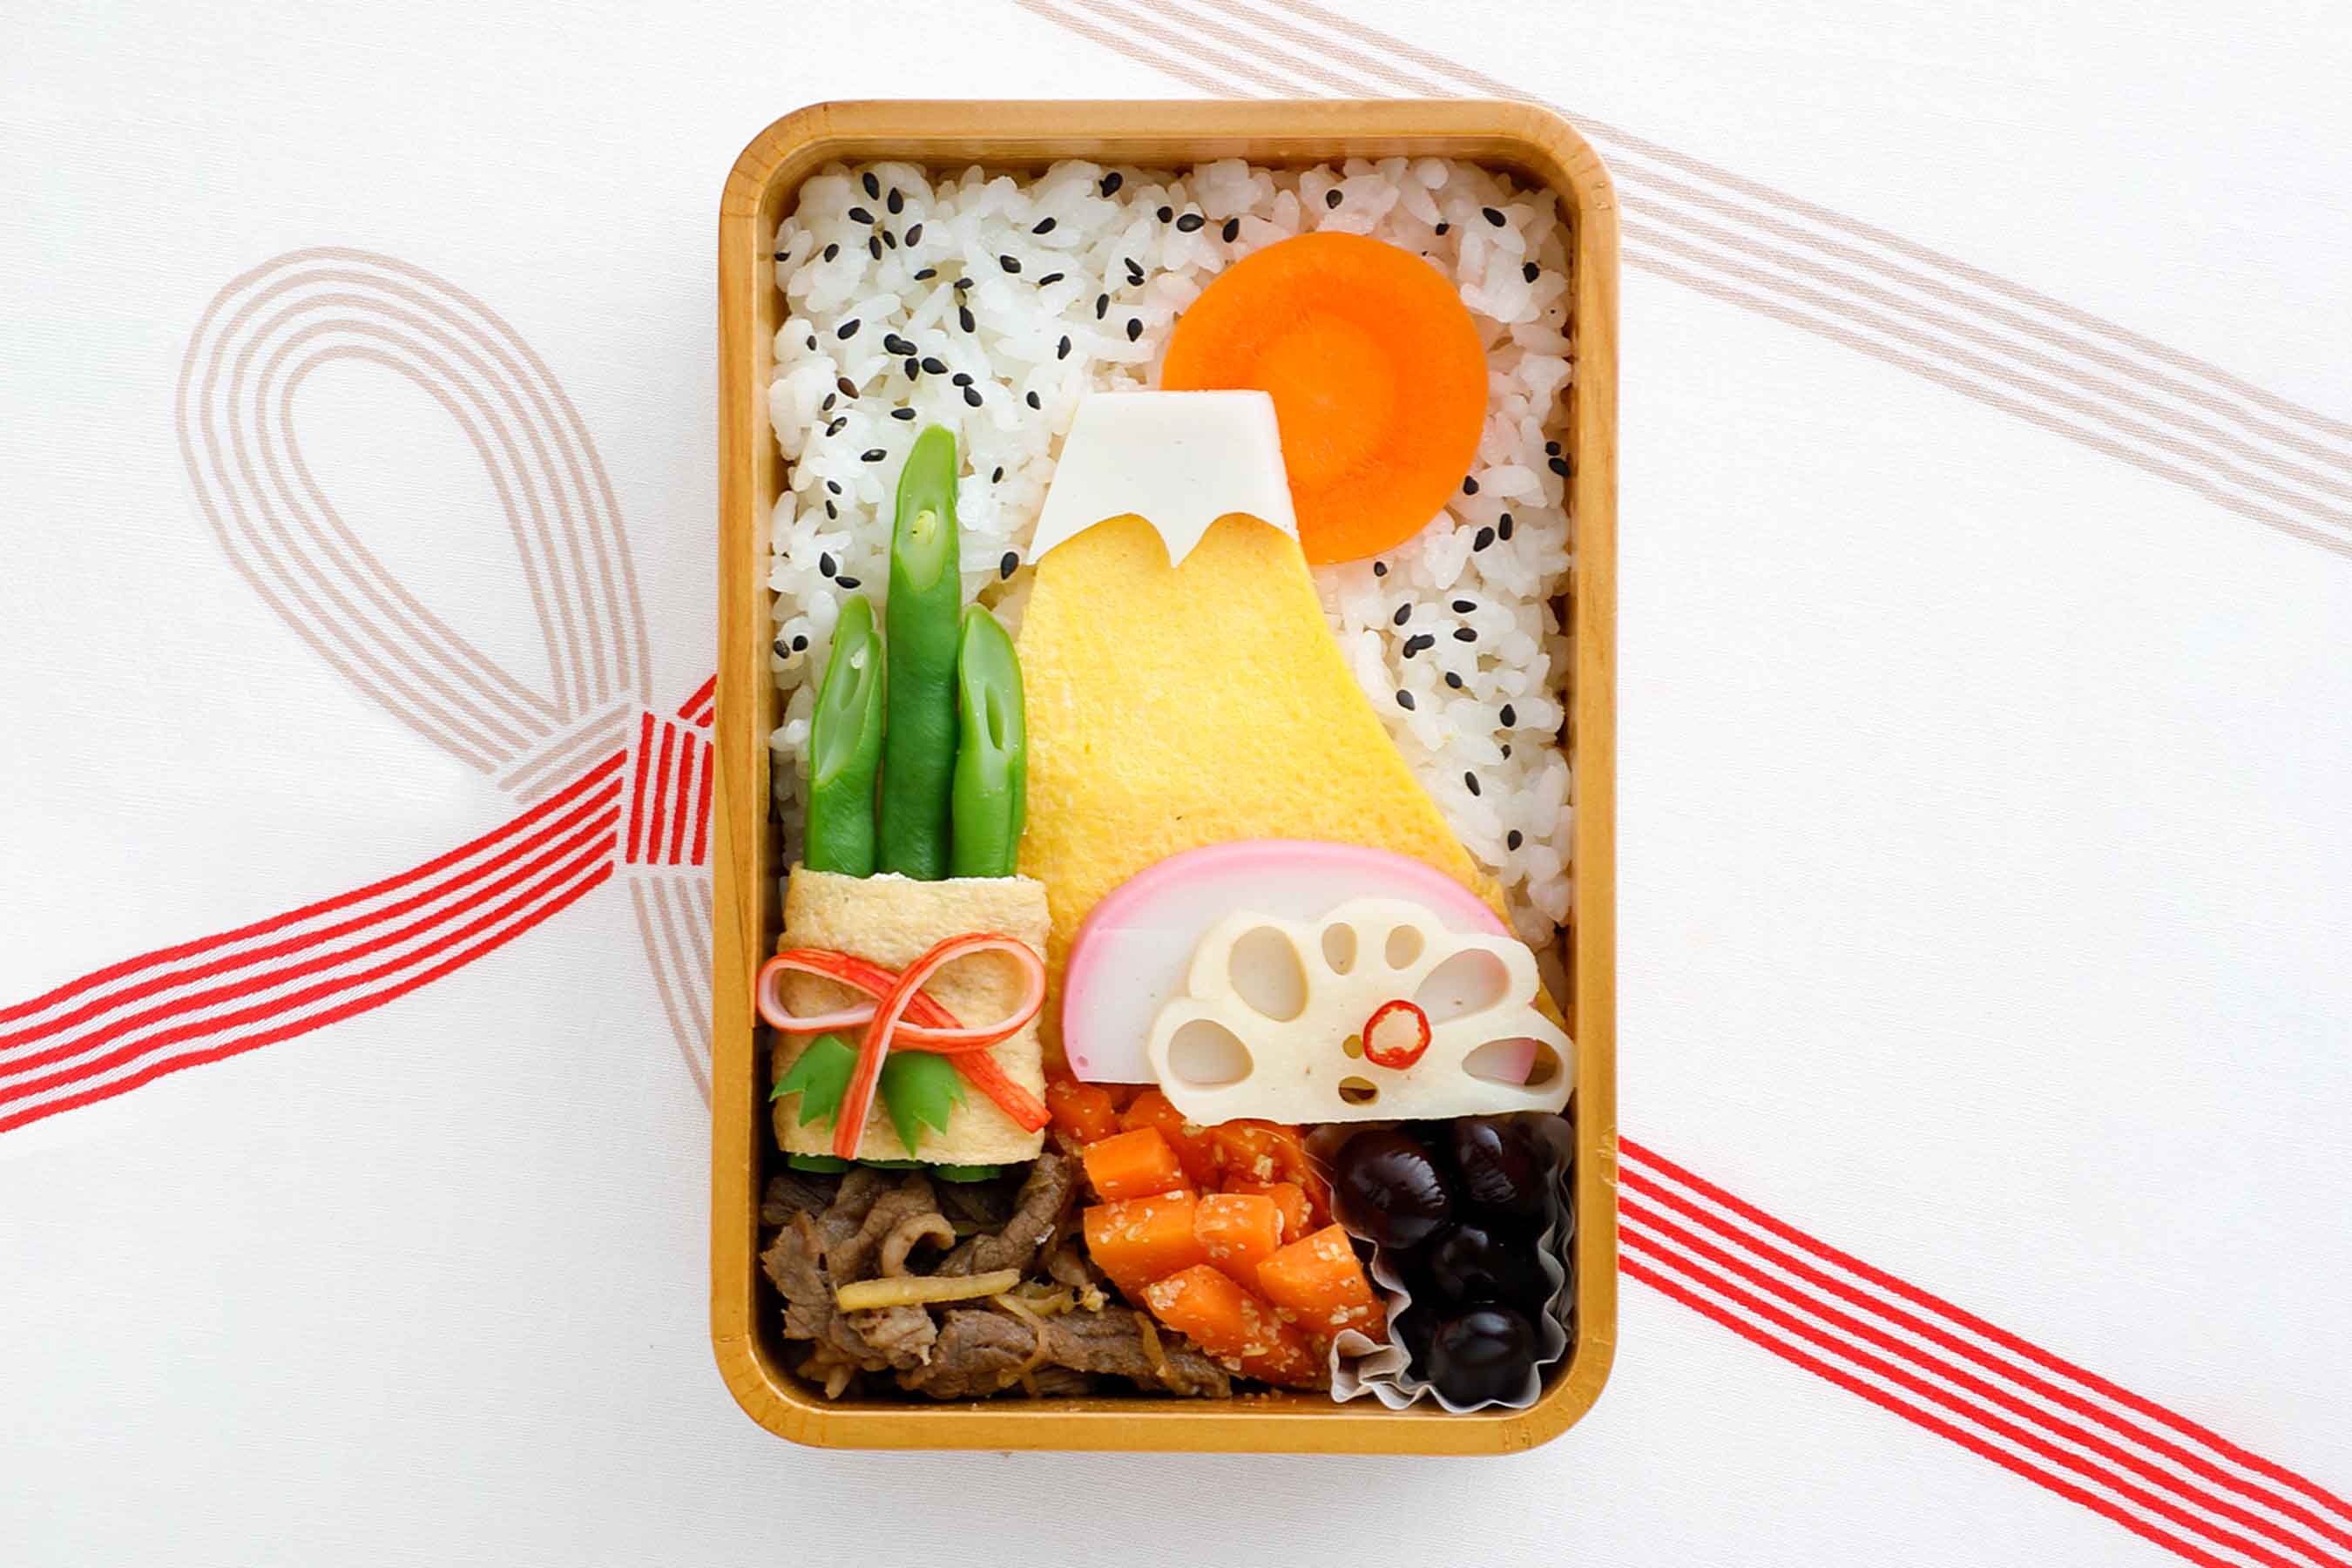 Celebrate the New Year with a decorative bento inspired by the sunrise ...